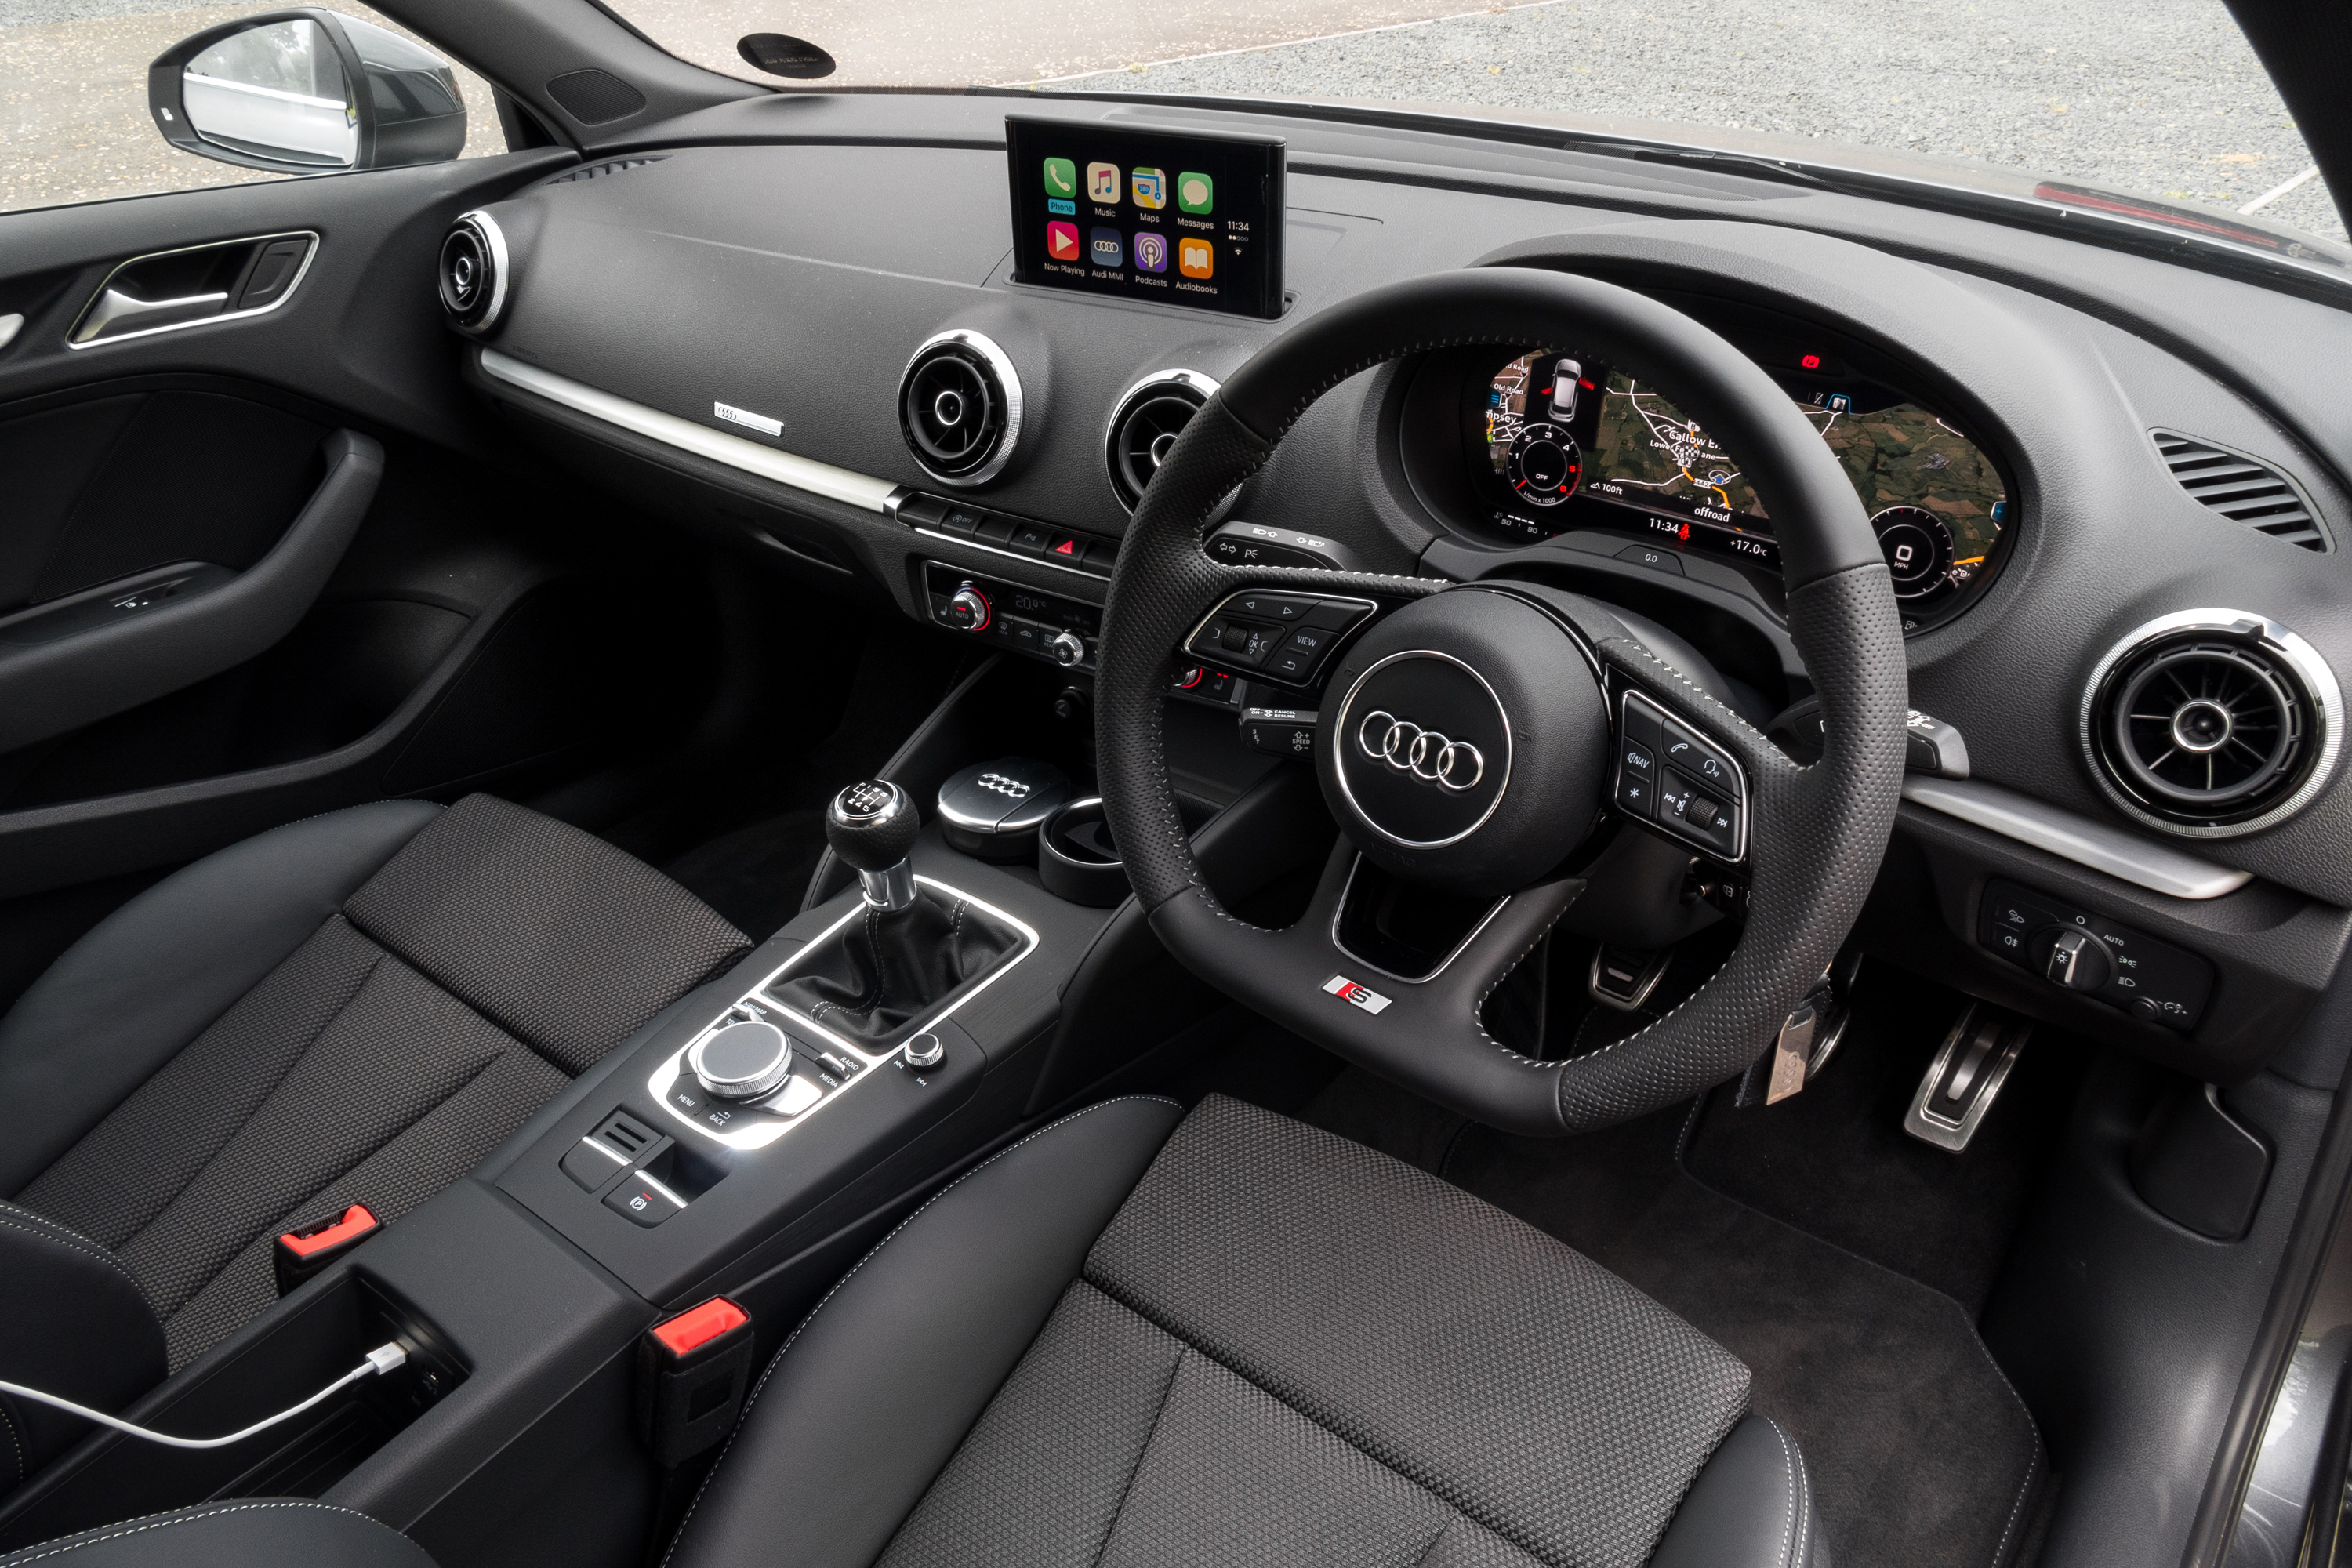 The A3 comes as standard with Apple CarPlay